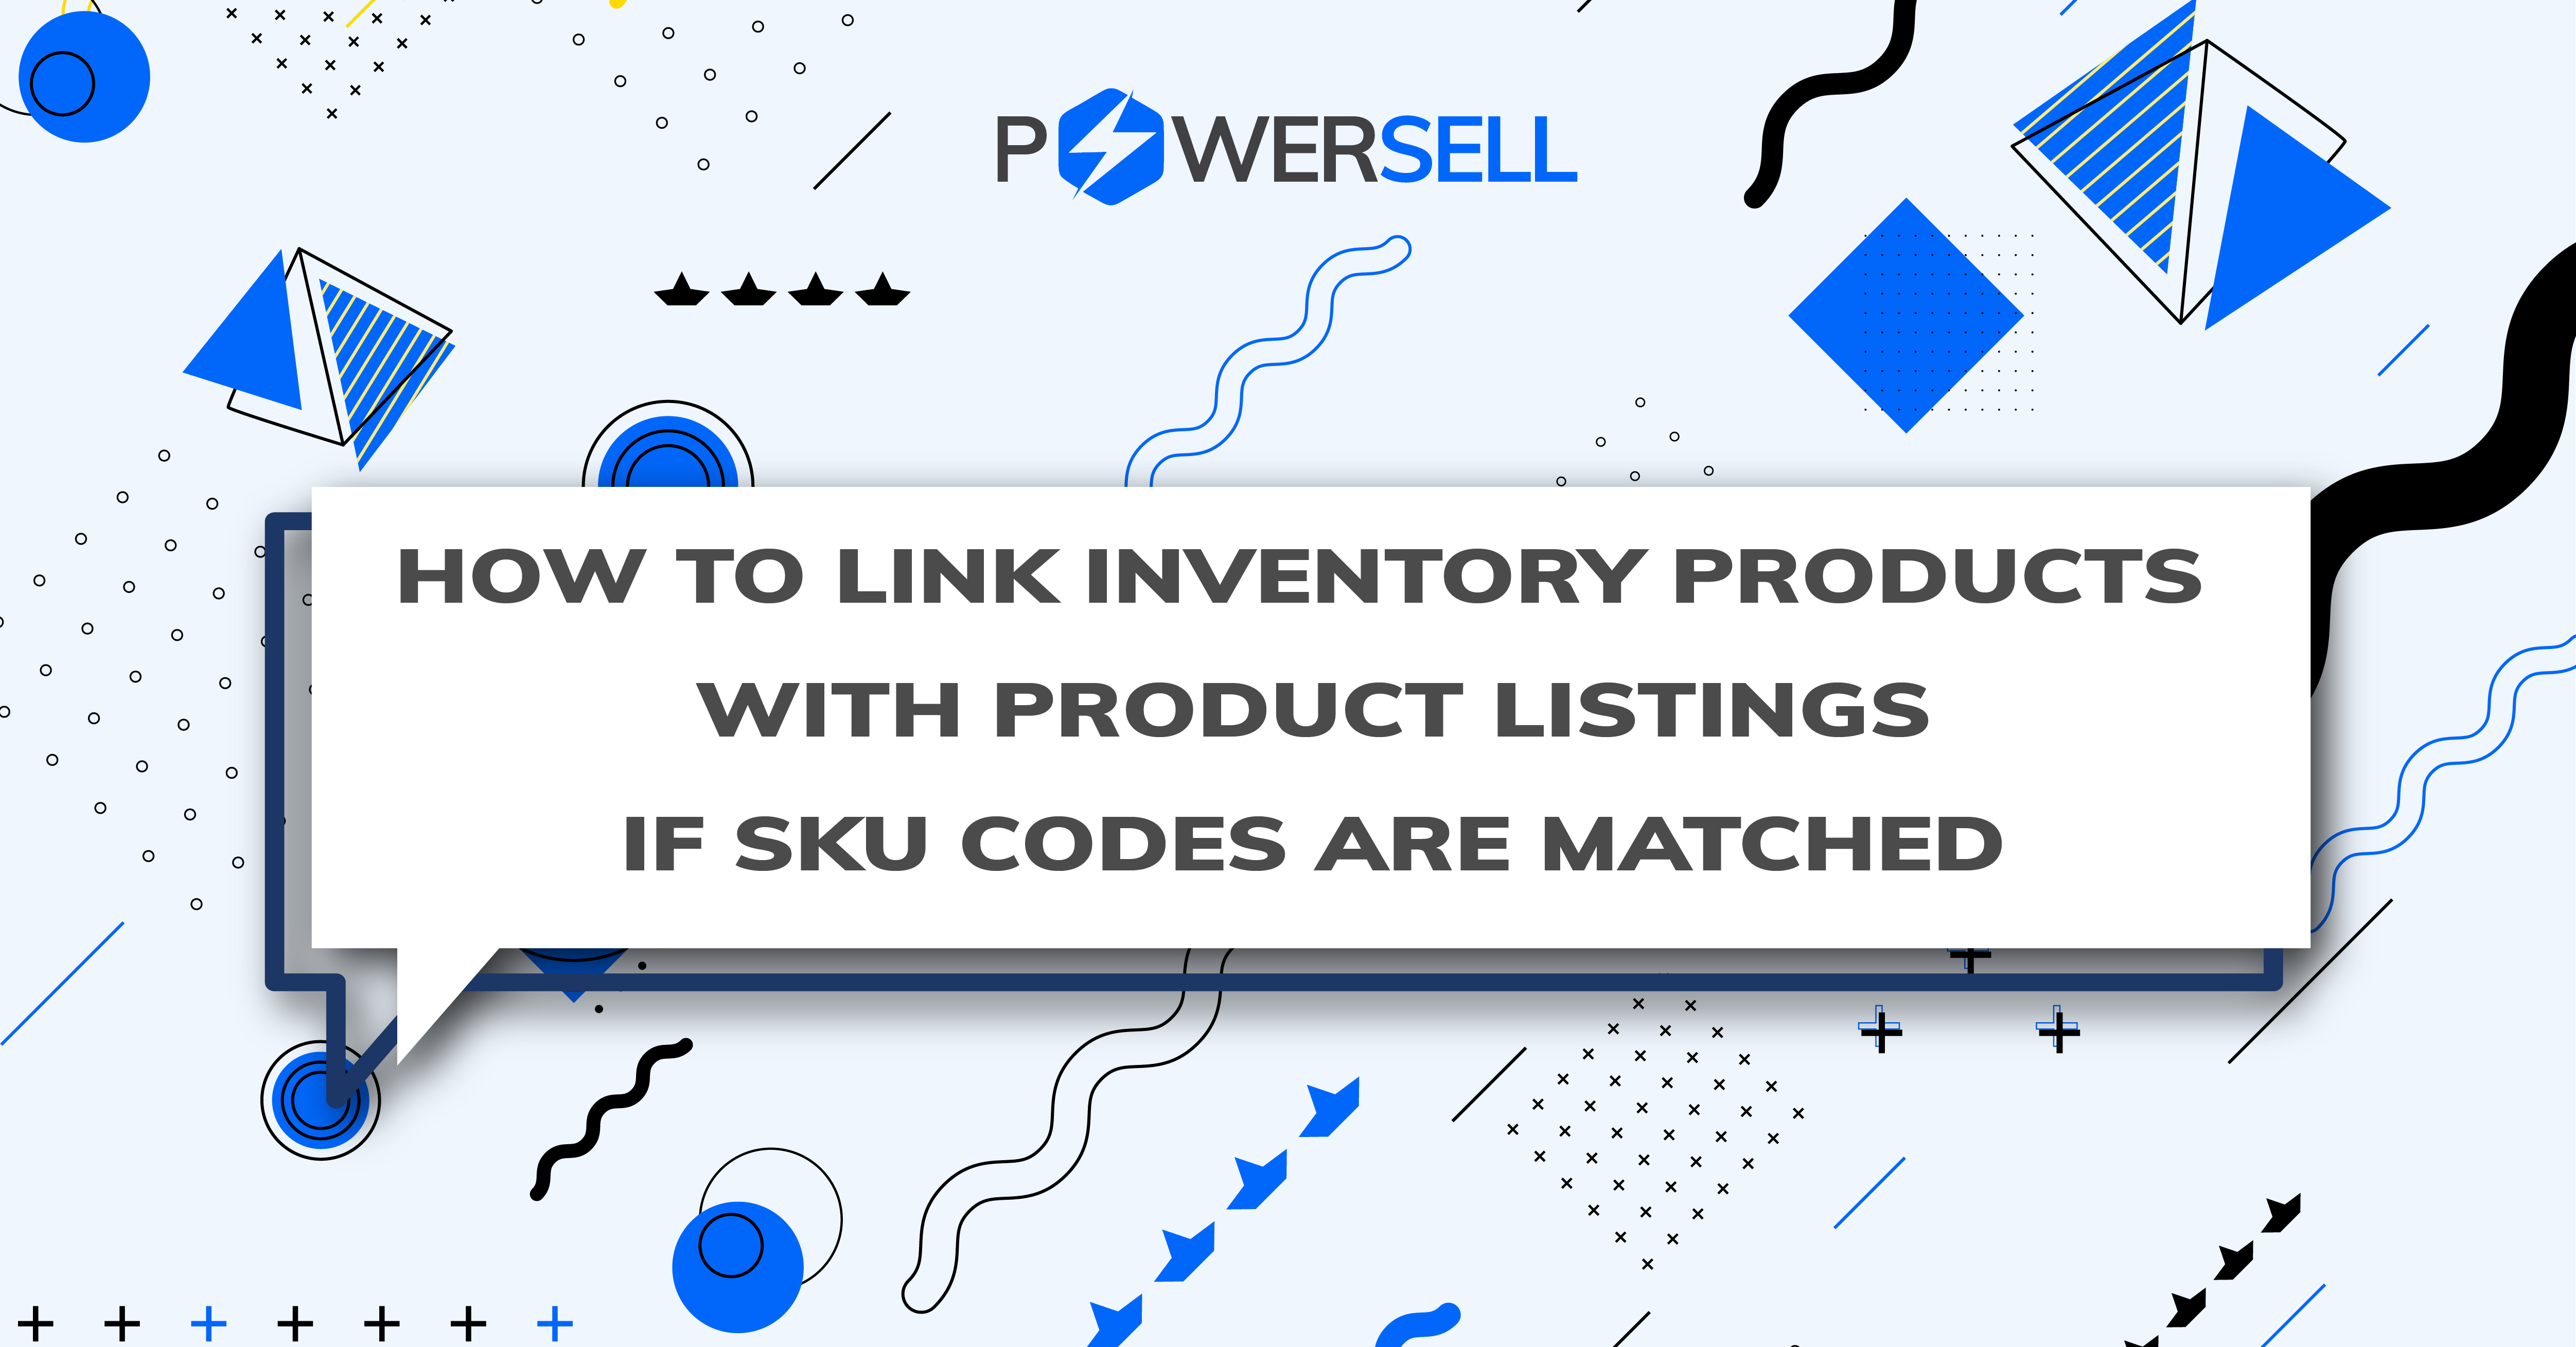 HOW TO LINK INVENTORY PRODUCTS WITH PRODUCT LISTINGS IF SKU CODES ARE MATCHED